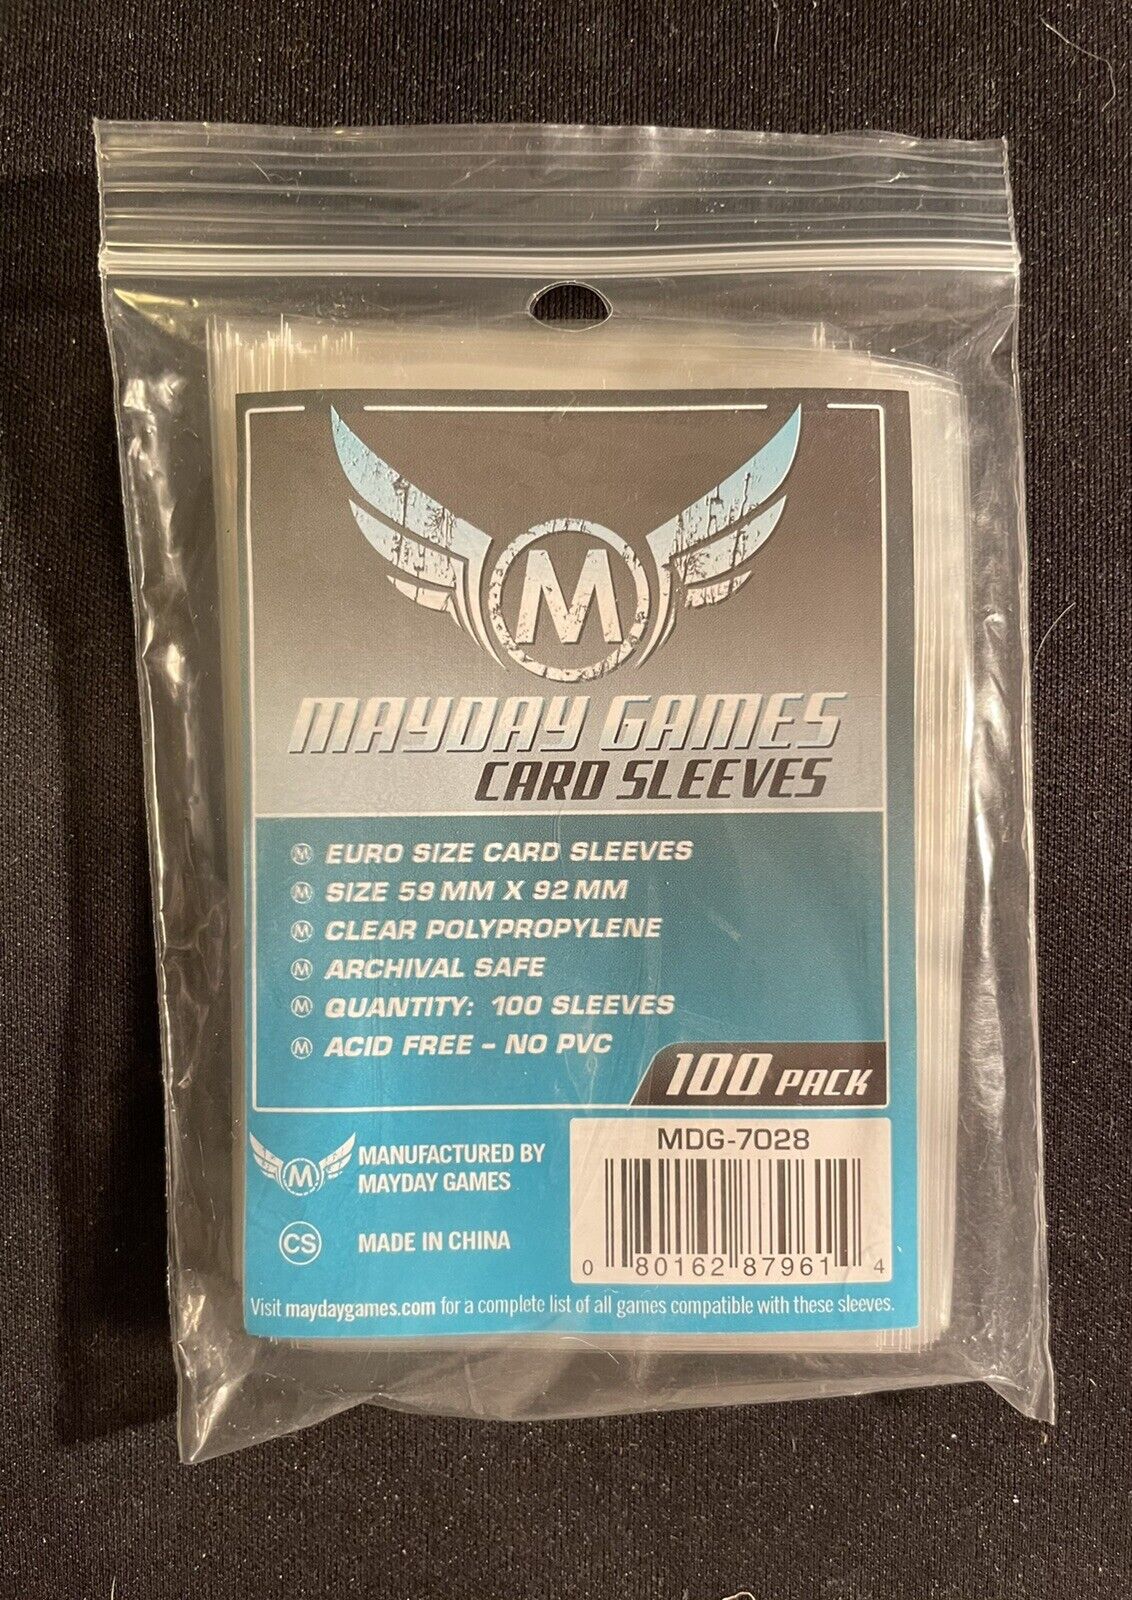 New Mayday Games Euro Size Card Sleeves 59 mm x 92 mm NIP 100 Per Pack Clear